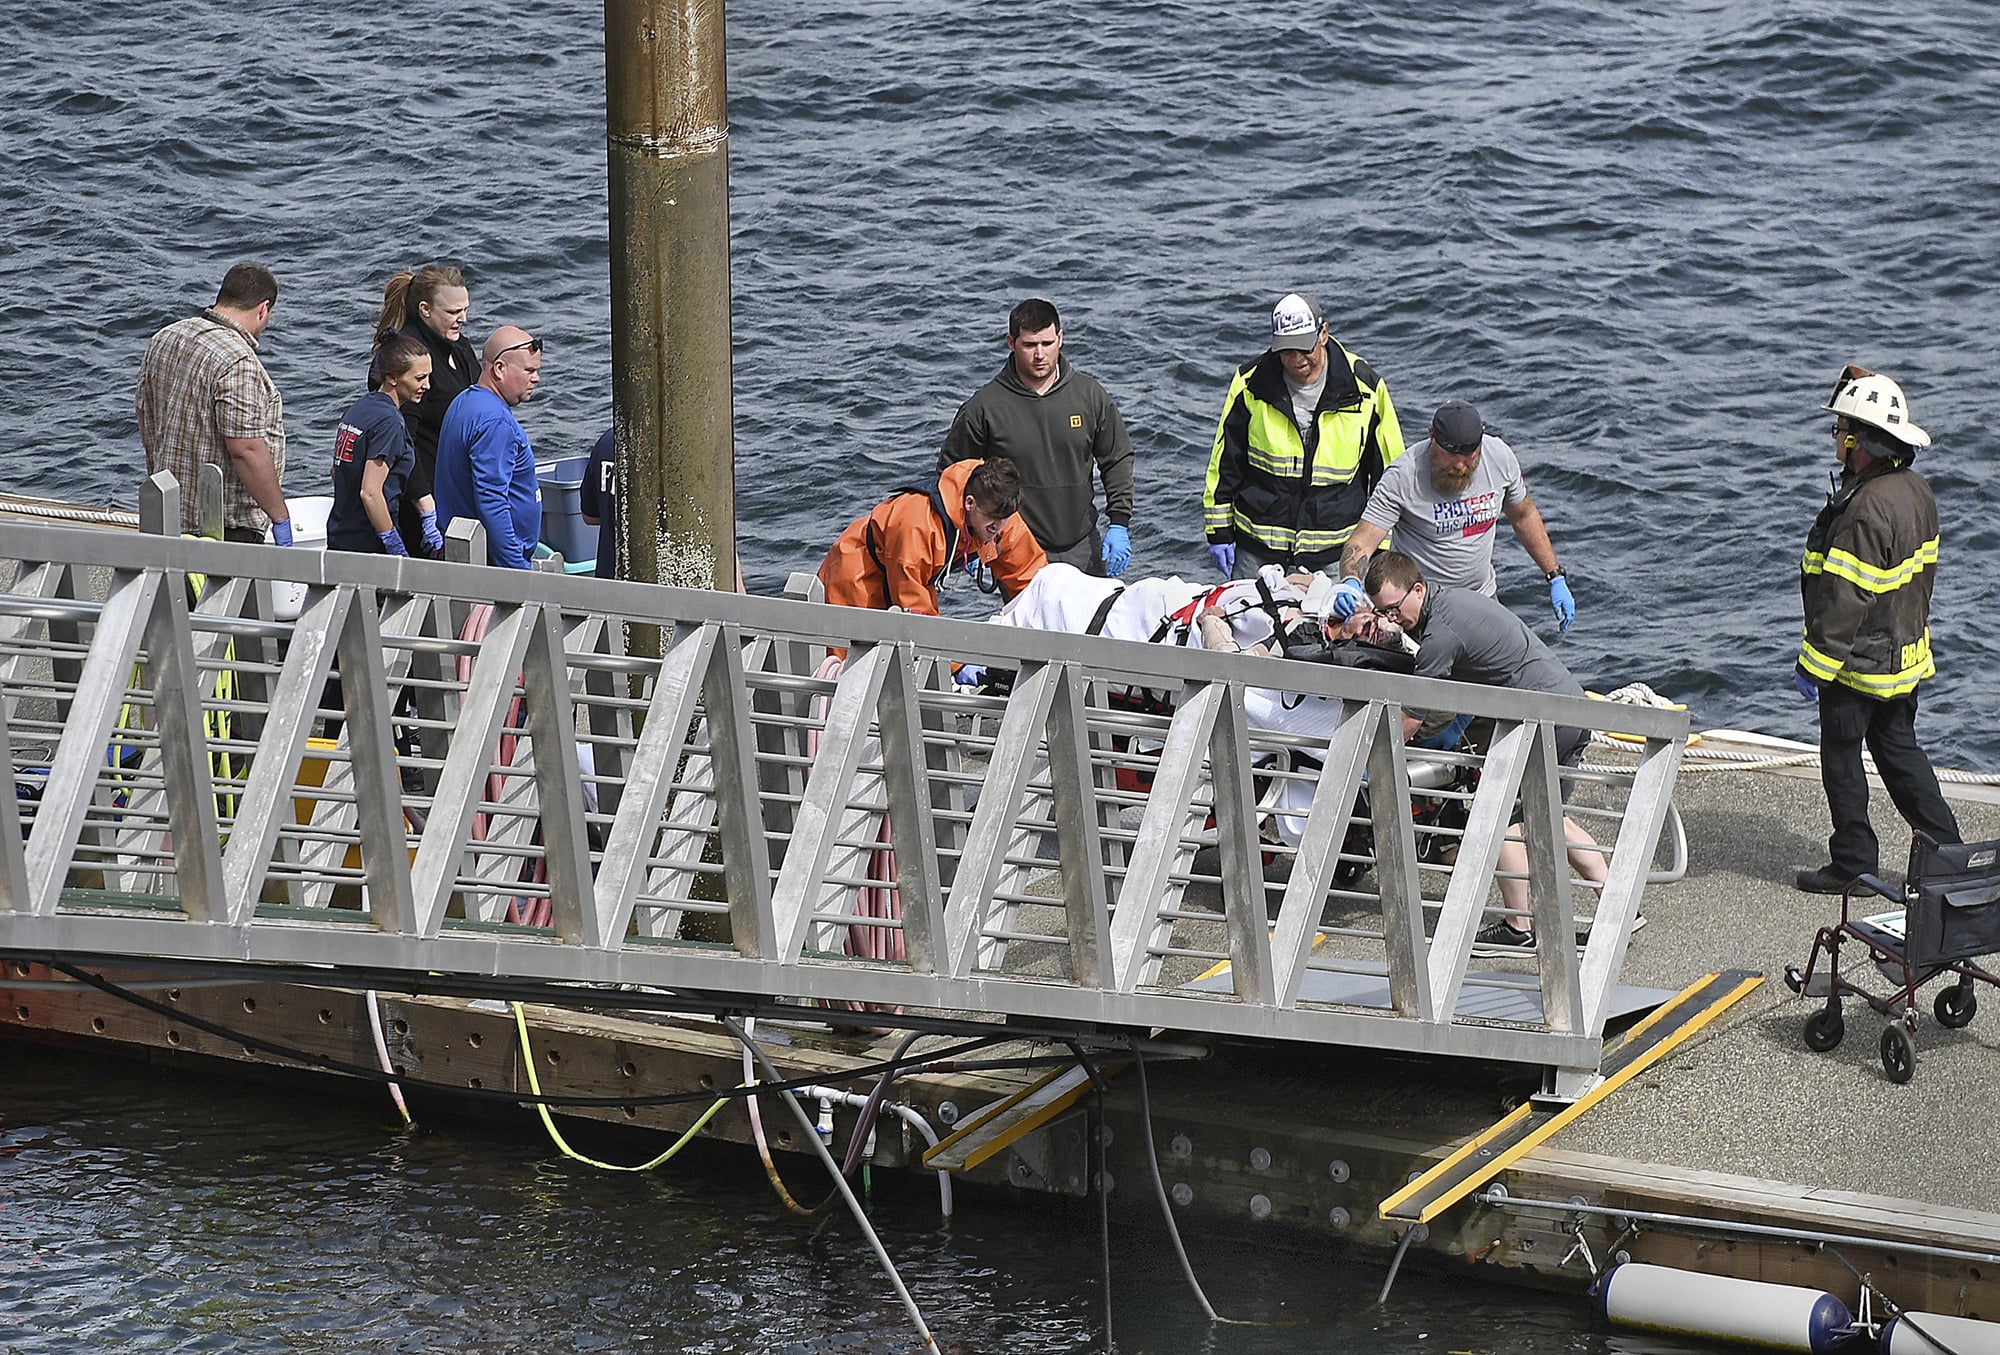 Emergency response crews transport an injured passenger to an ambulance at the George Inlet Lodge docks, Monday, May 13, 2019, in Ketchikan, Alaska. The passenger was from one of two sightseeing planes reported down in George Inlet early Monday afternoon and was dropped off by a U.S. Coast Guard 45-foot response boat.